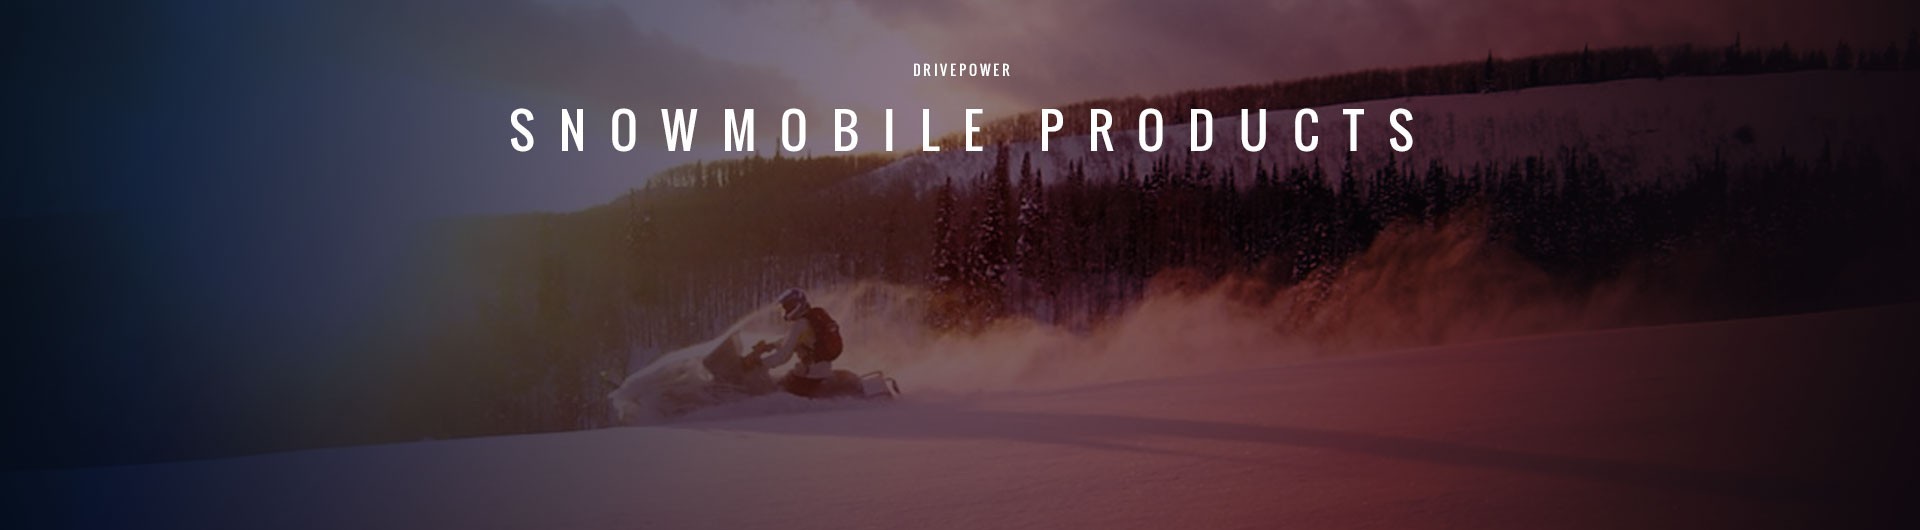 Snowmobile Products